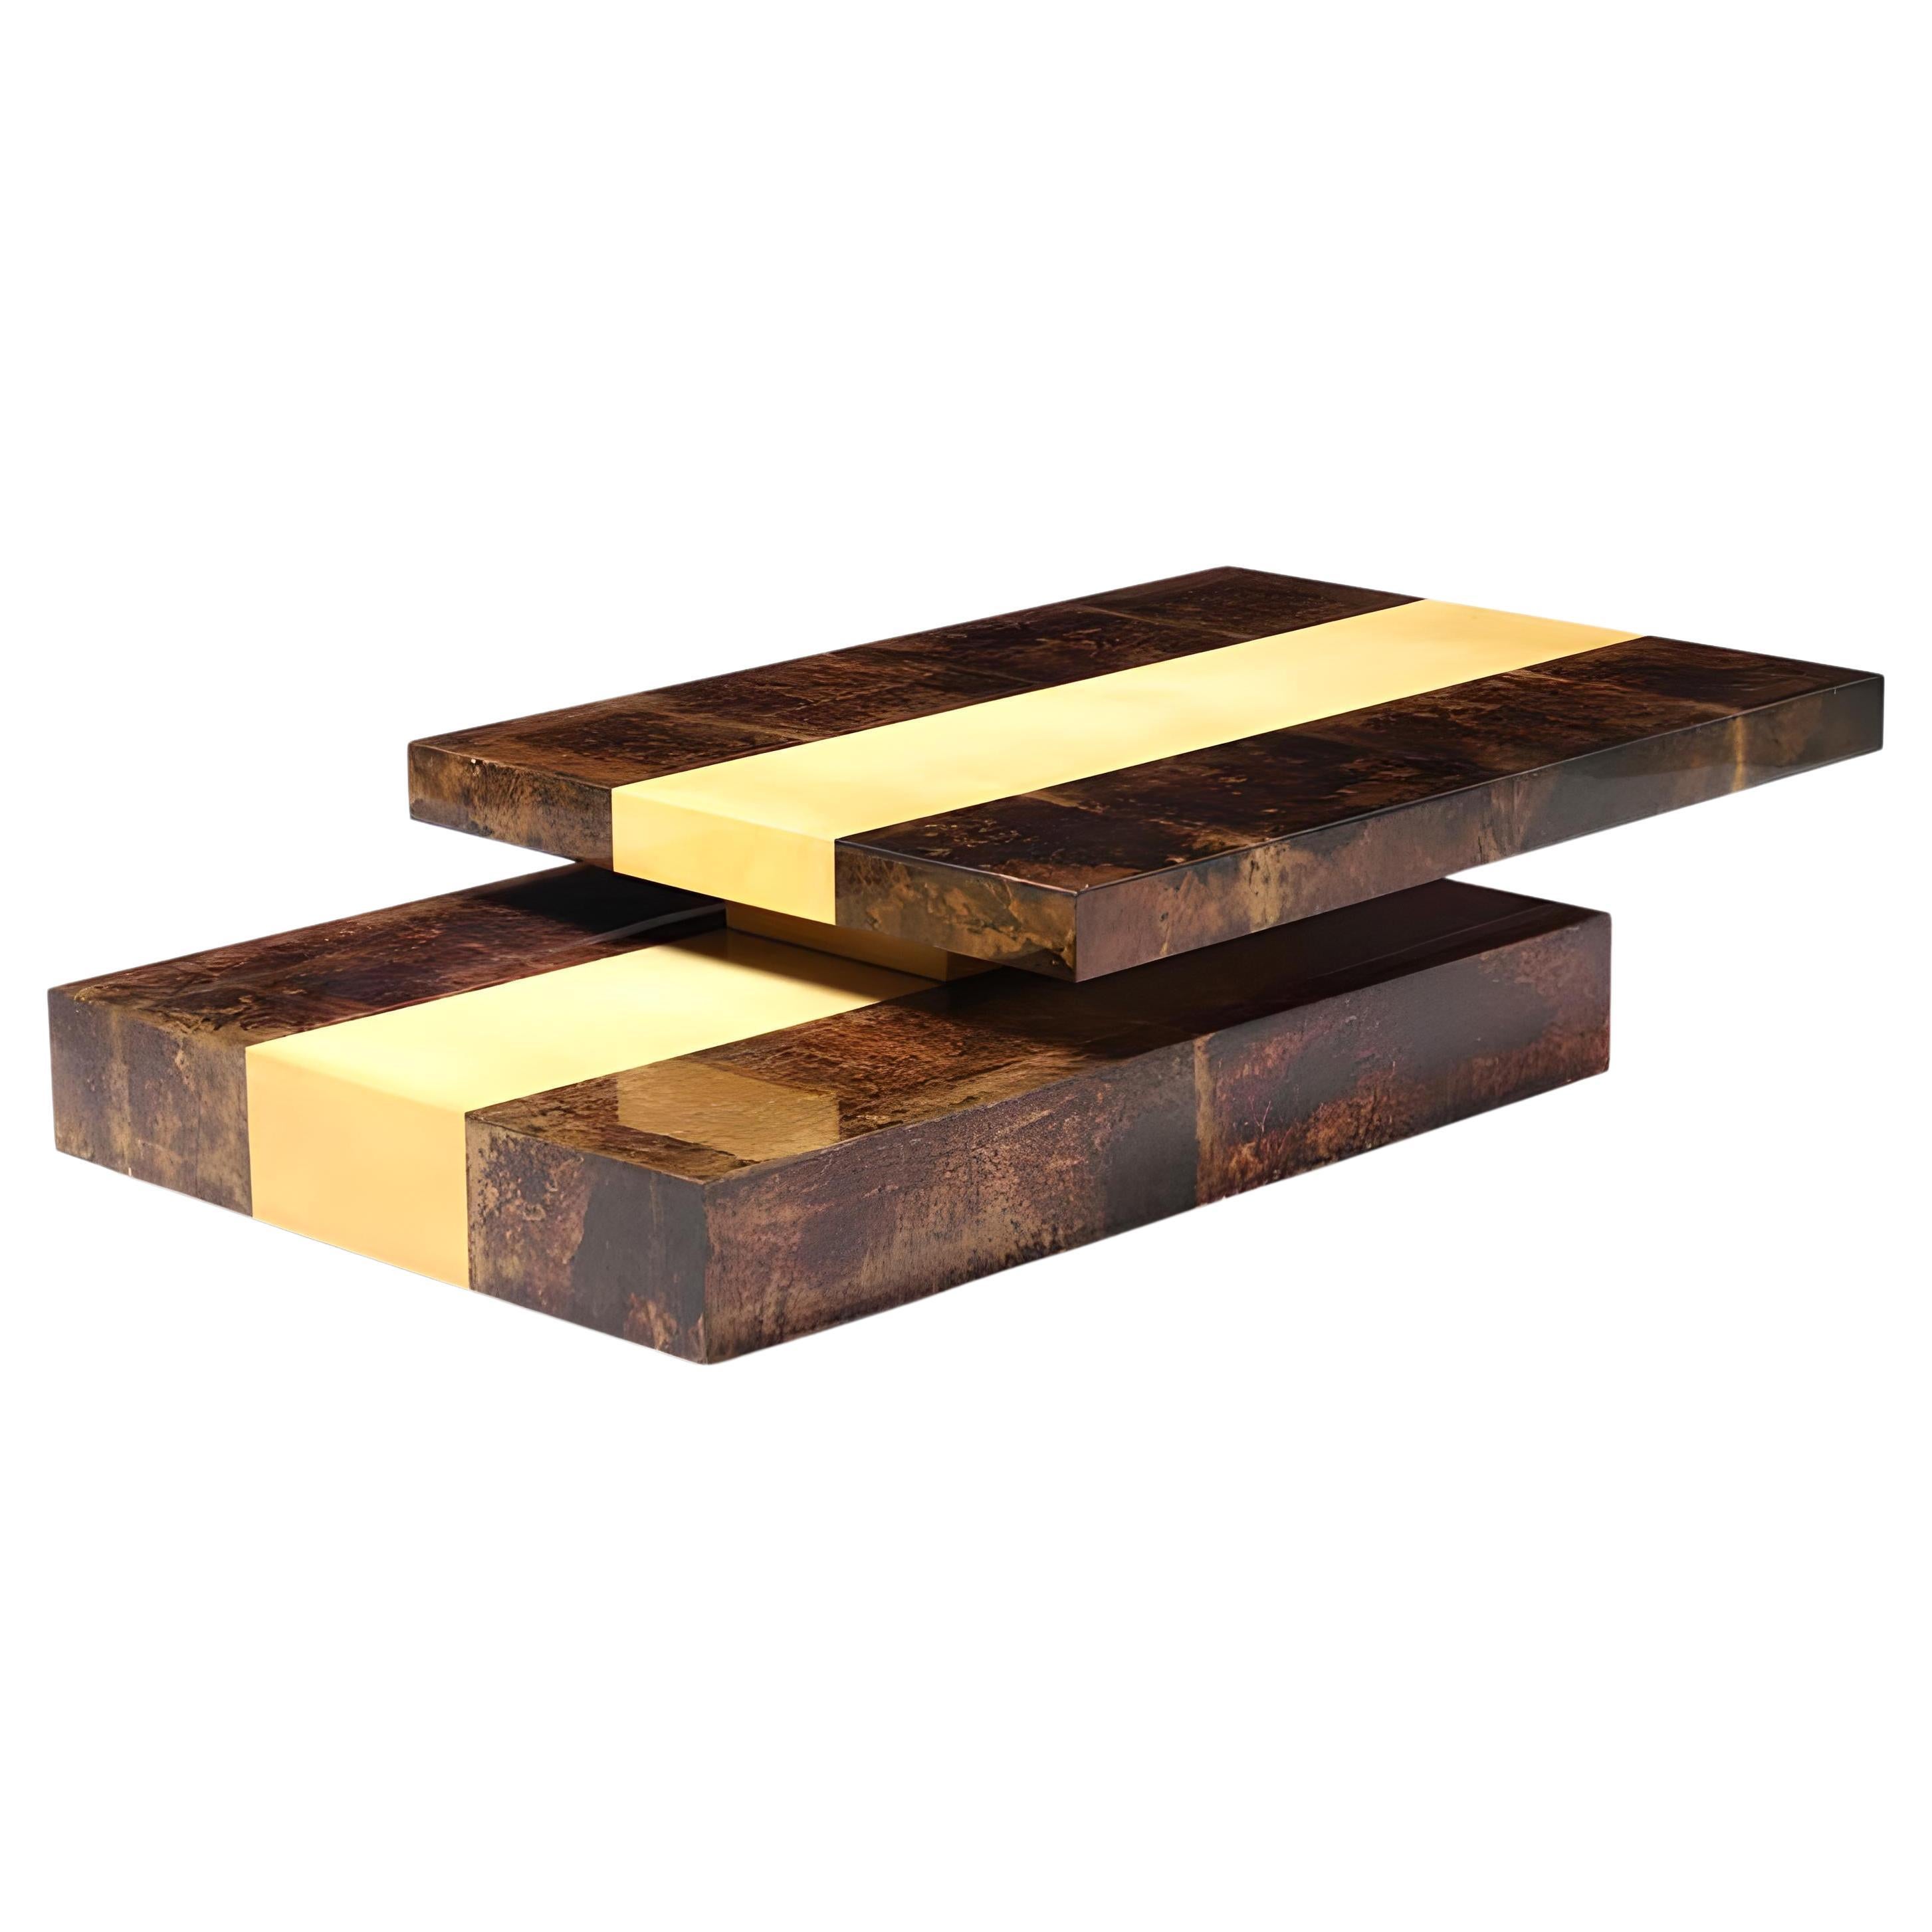 Low Coffee Table by Aldo Tura